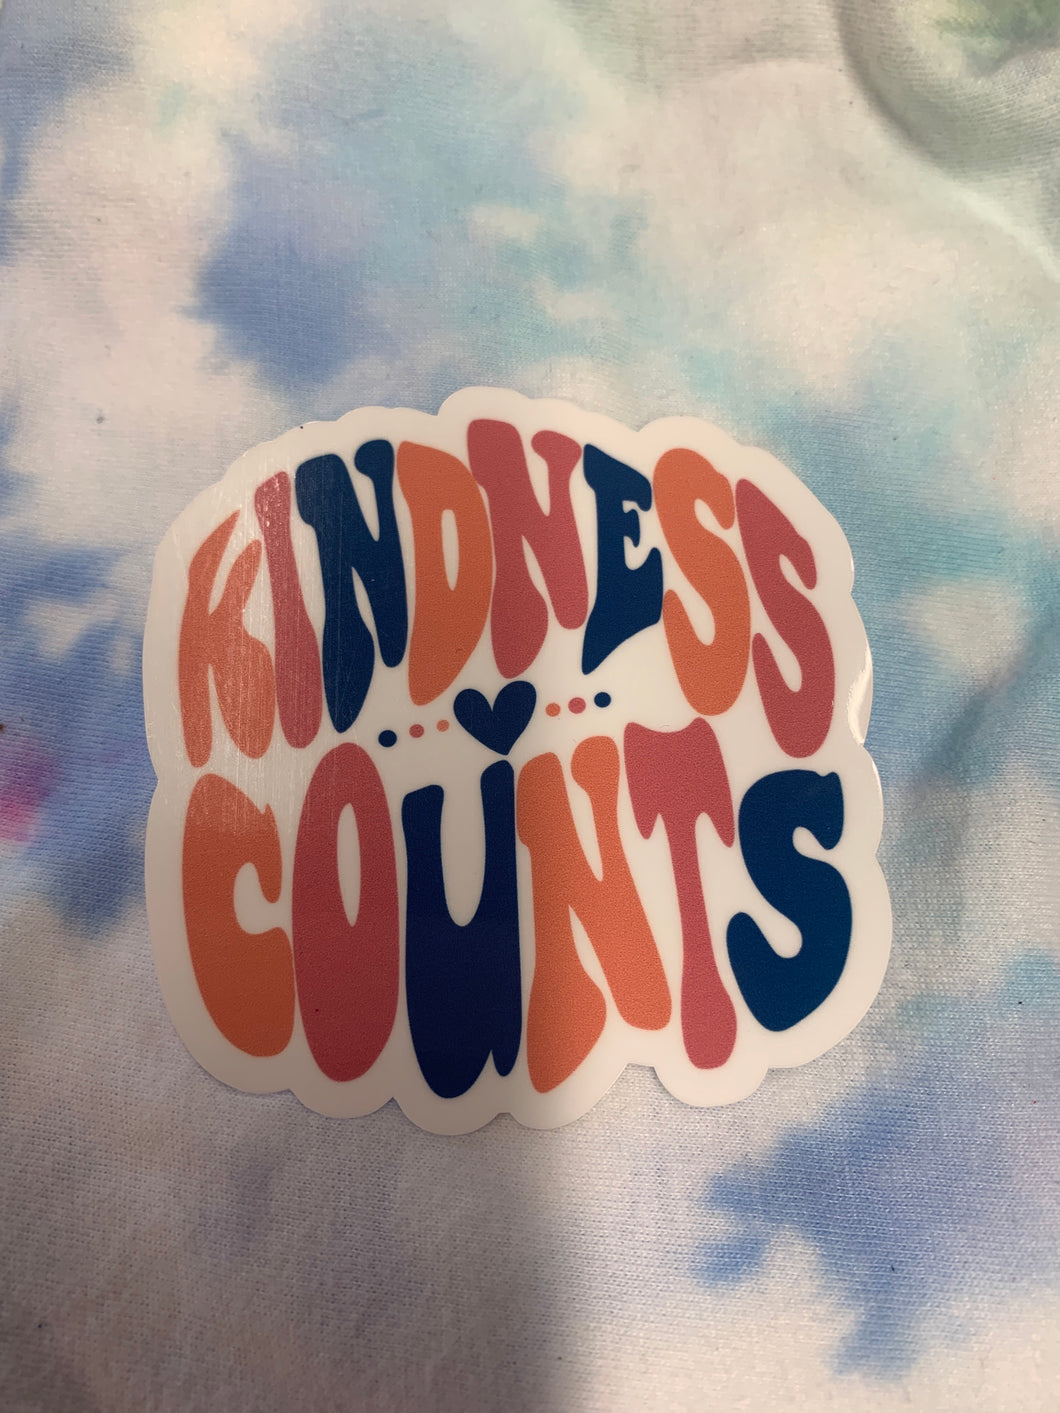 Kindness counts vinyl free shipping - Main glitter site 